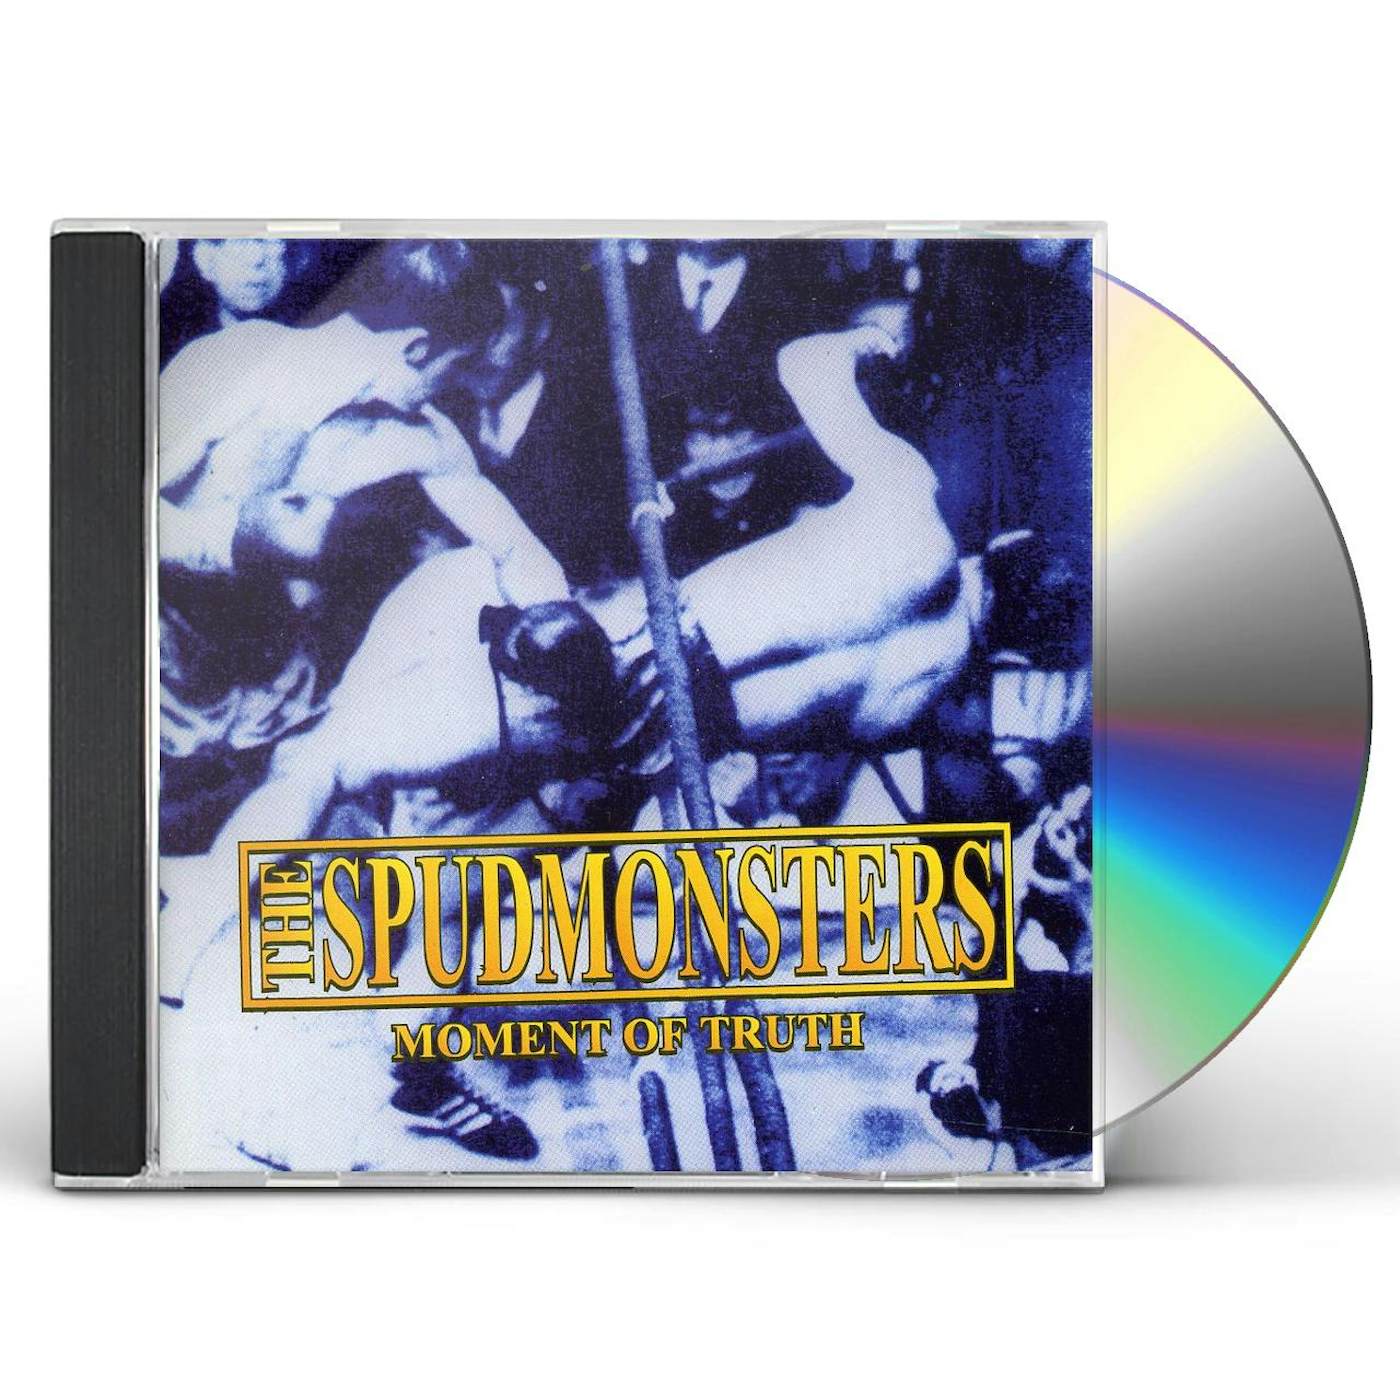 The Spudmonsters MOMENT OF TRUTH CD